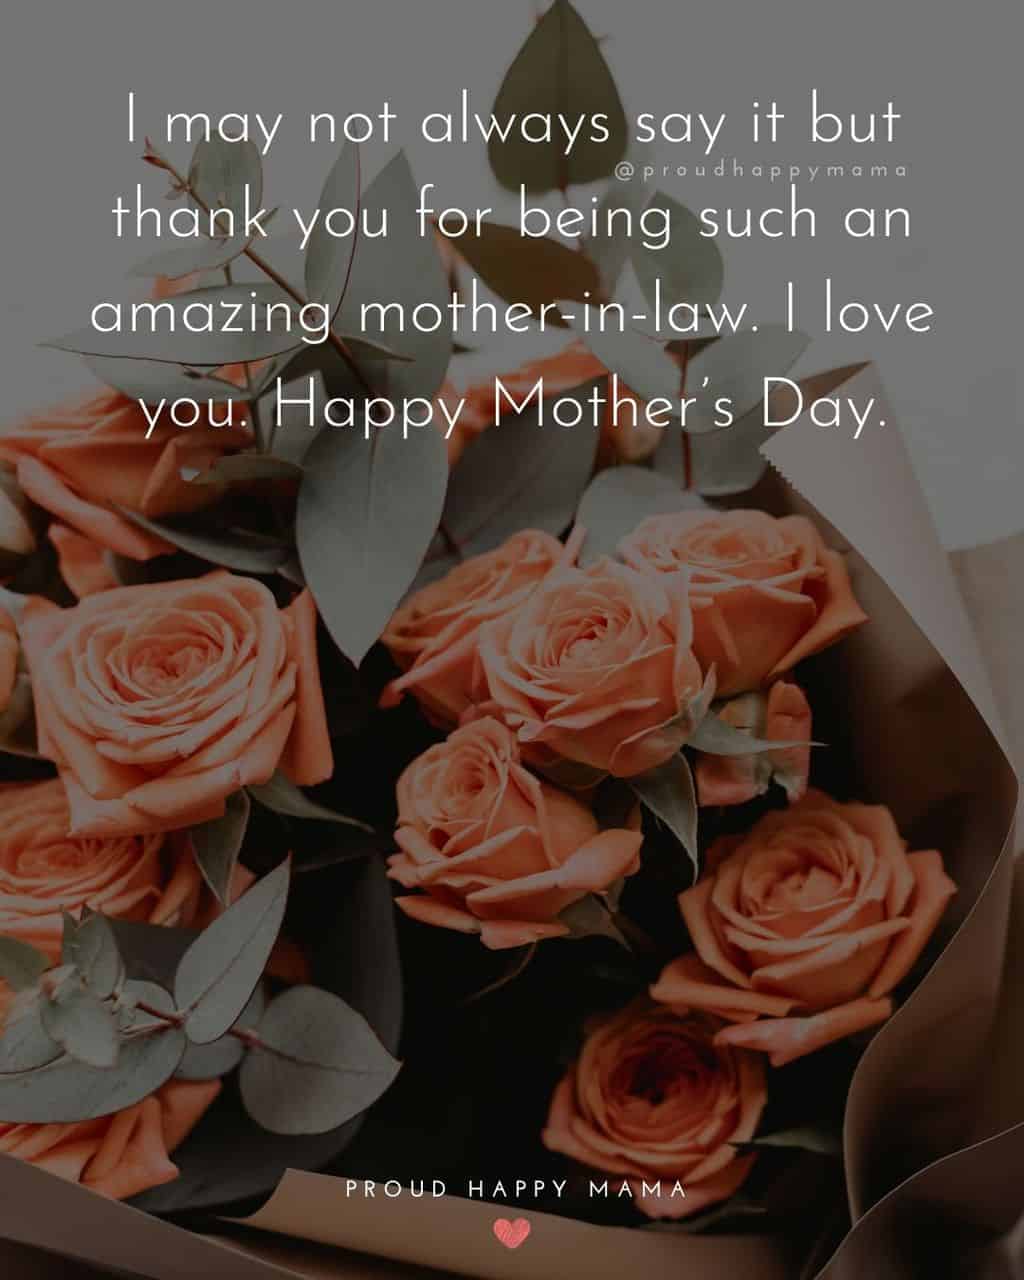 Happy Mothers Day Quotes For Mother In Law - I may not always say it but thank you for being such an amazing mother in law. I love you.